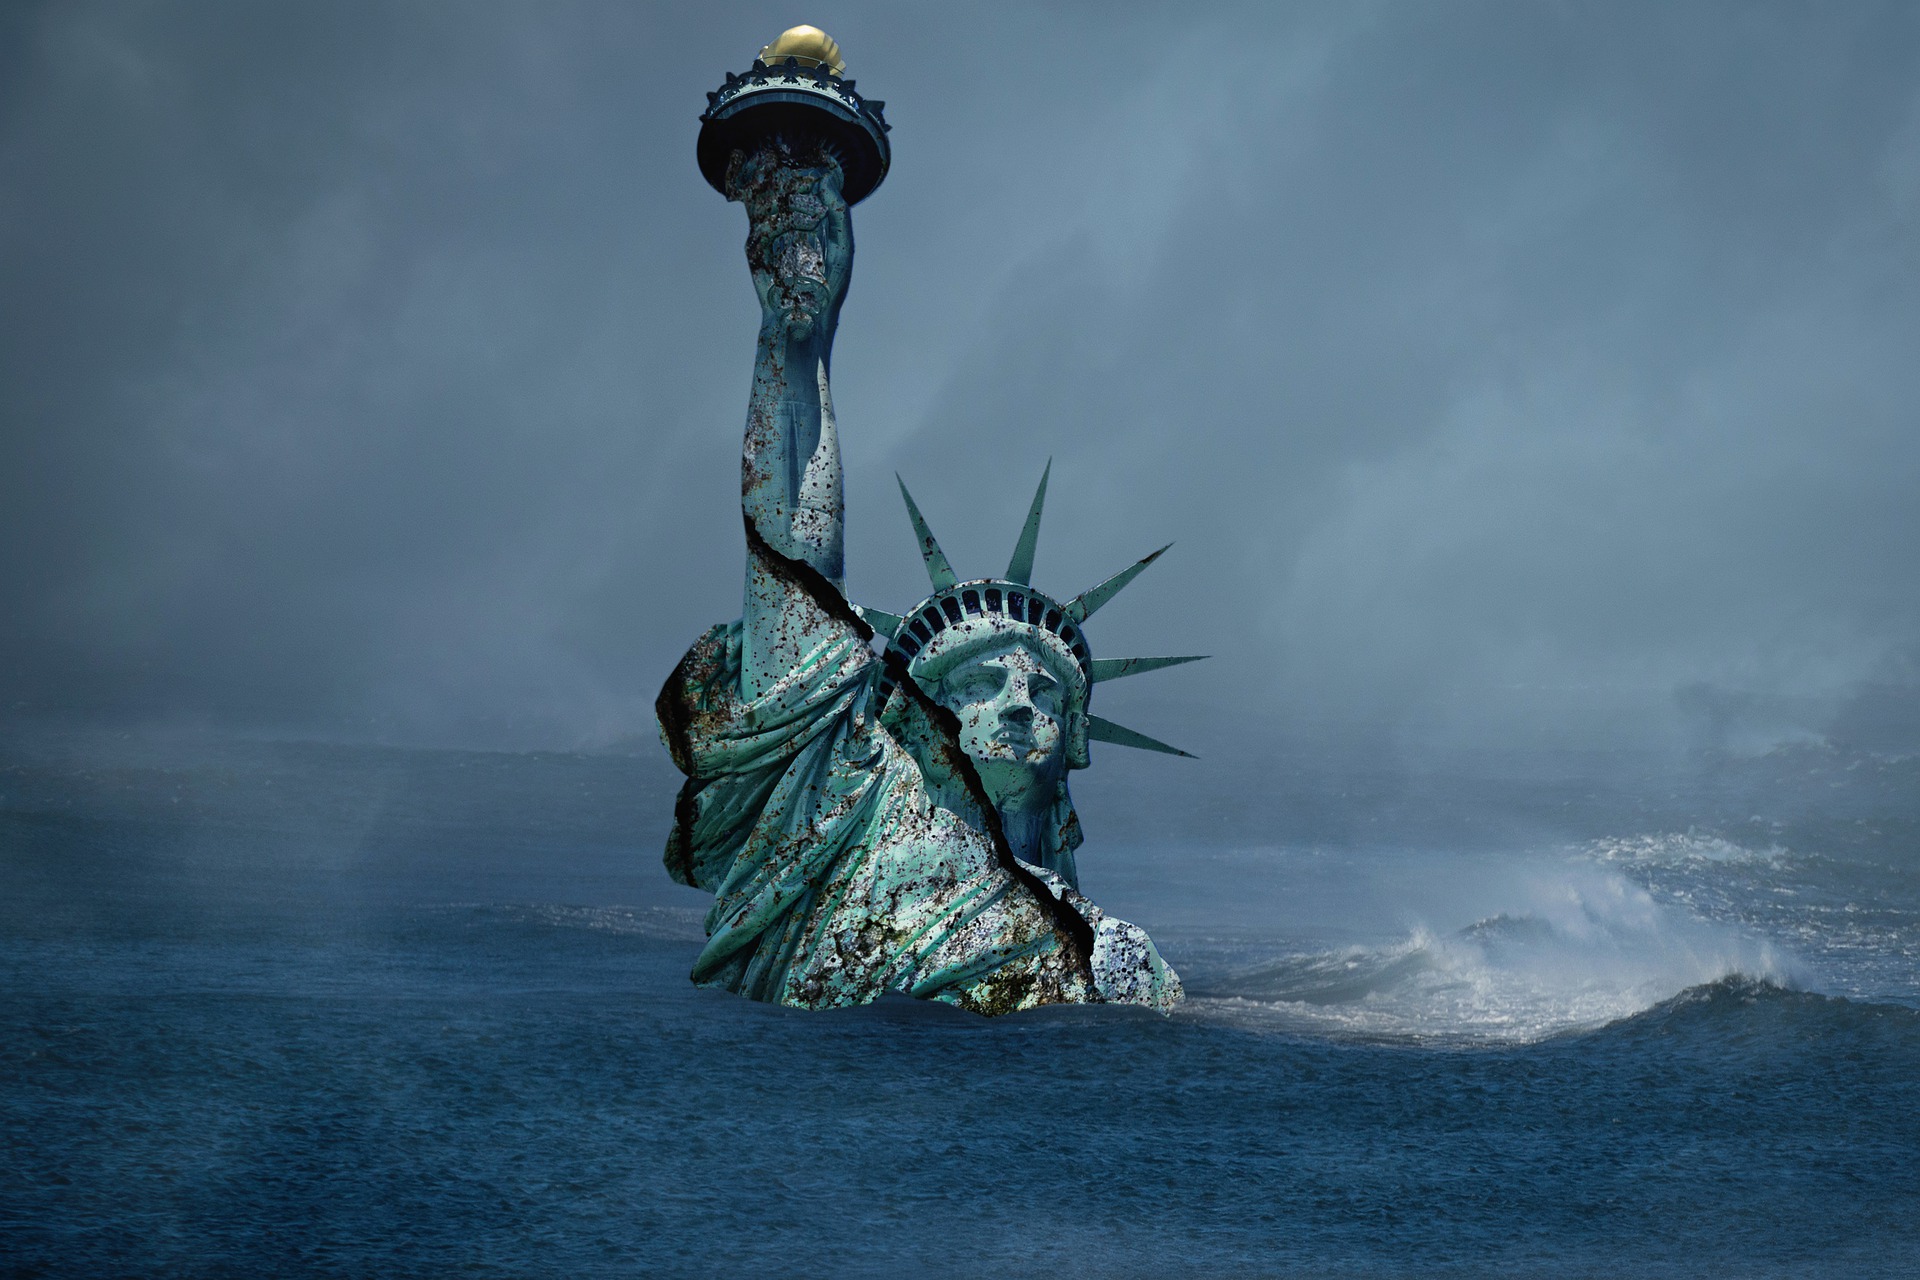 a sinking statue of liberty g27d66fdf5 1920 - Σόλων ΜΚΟ